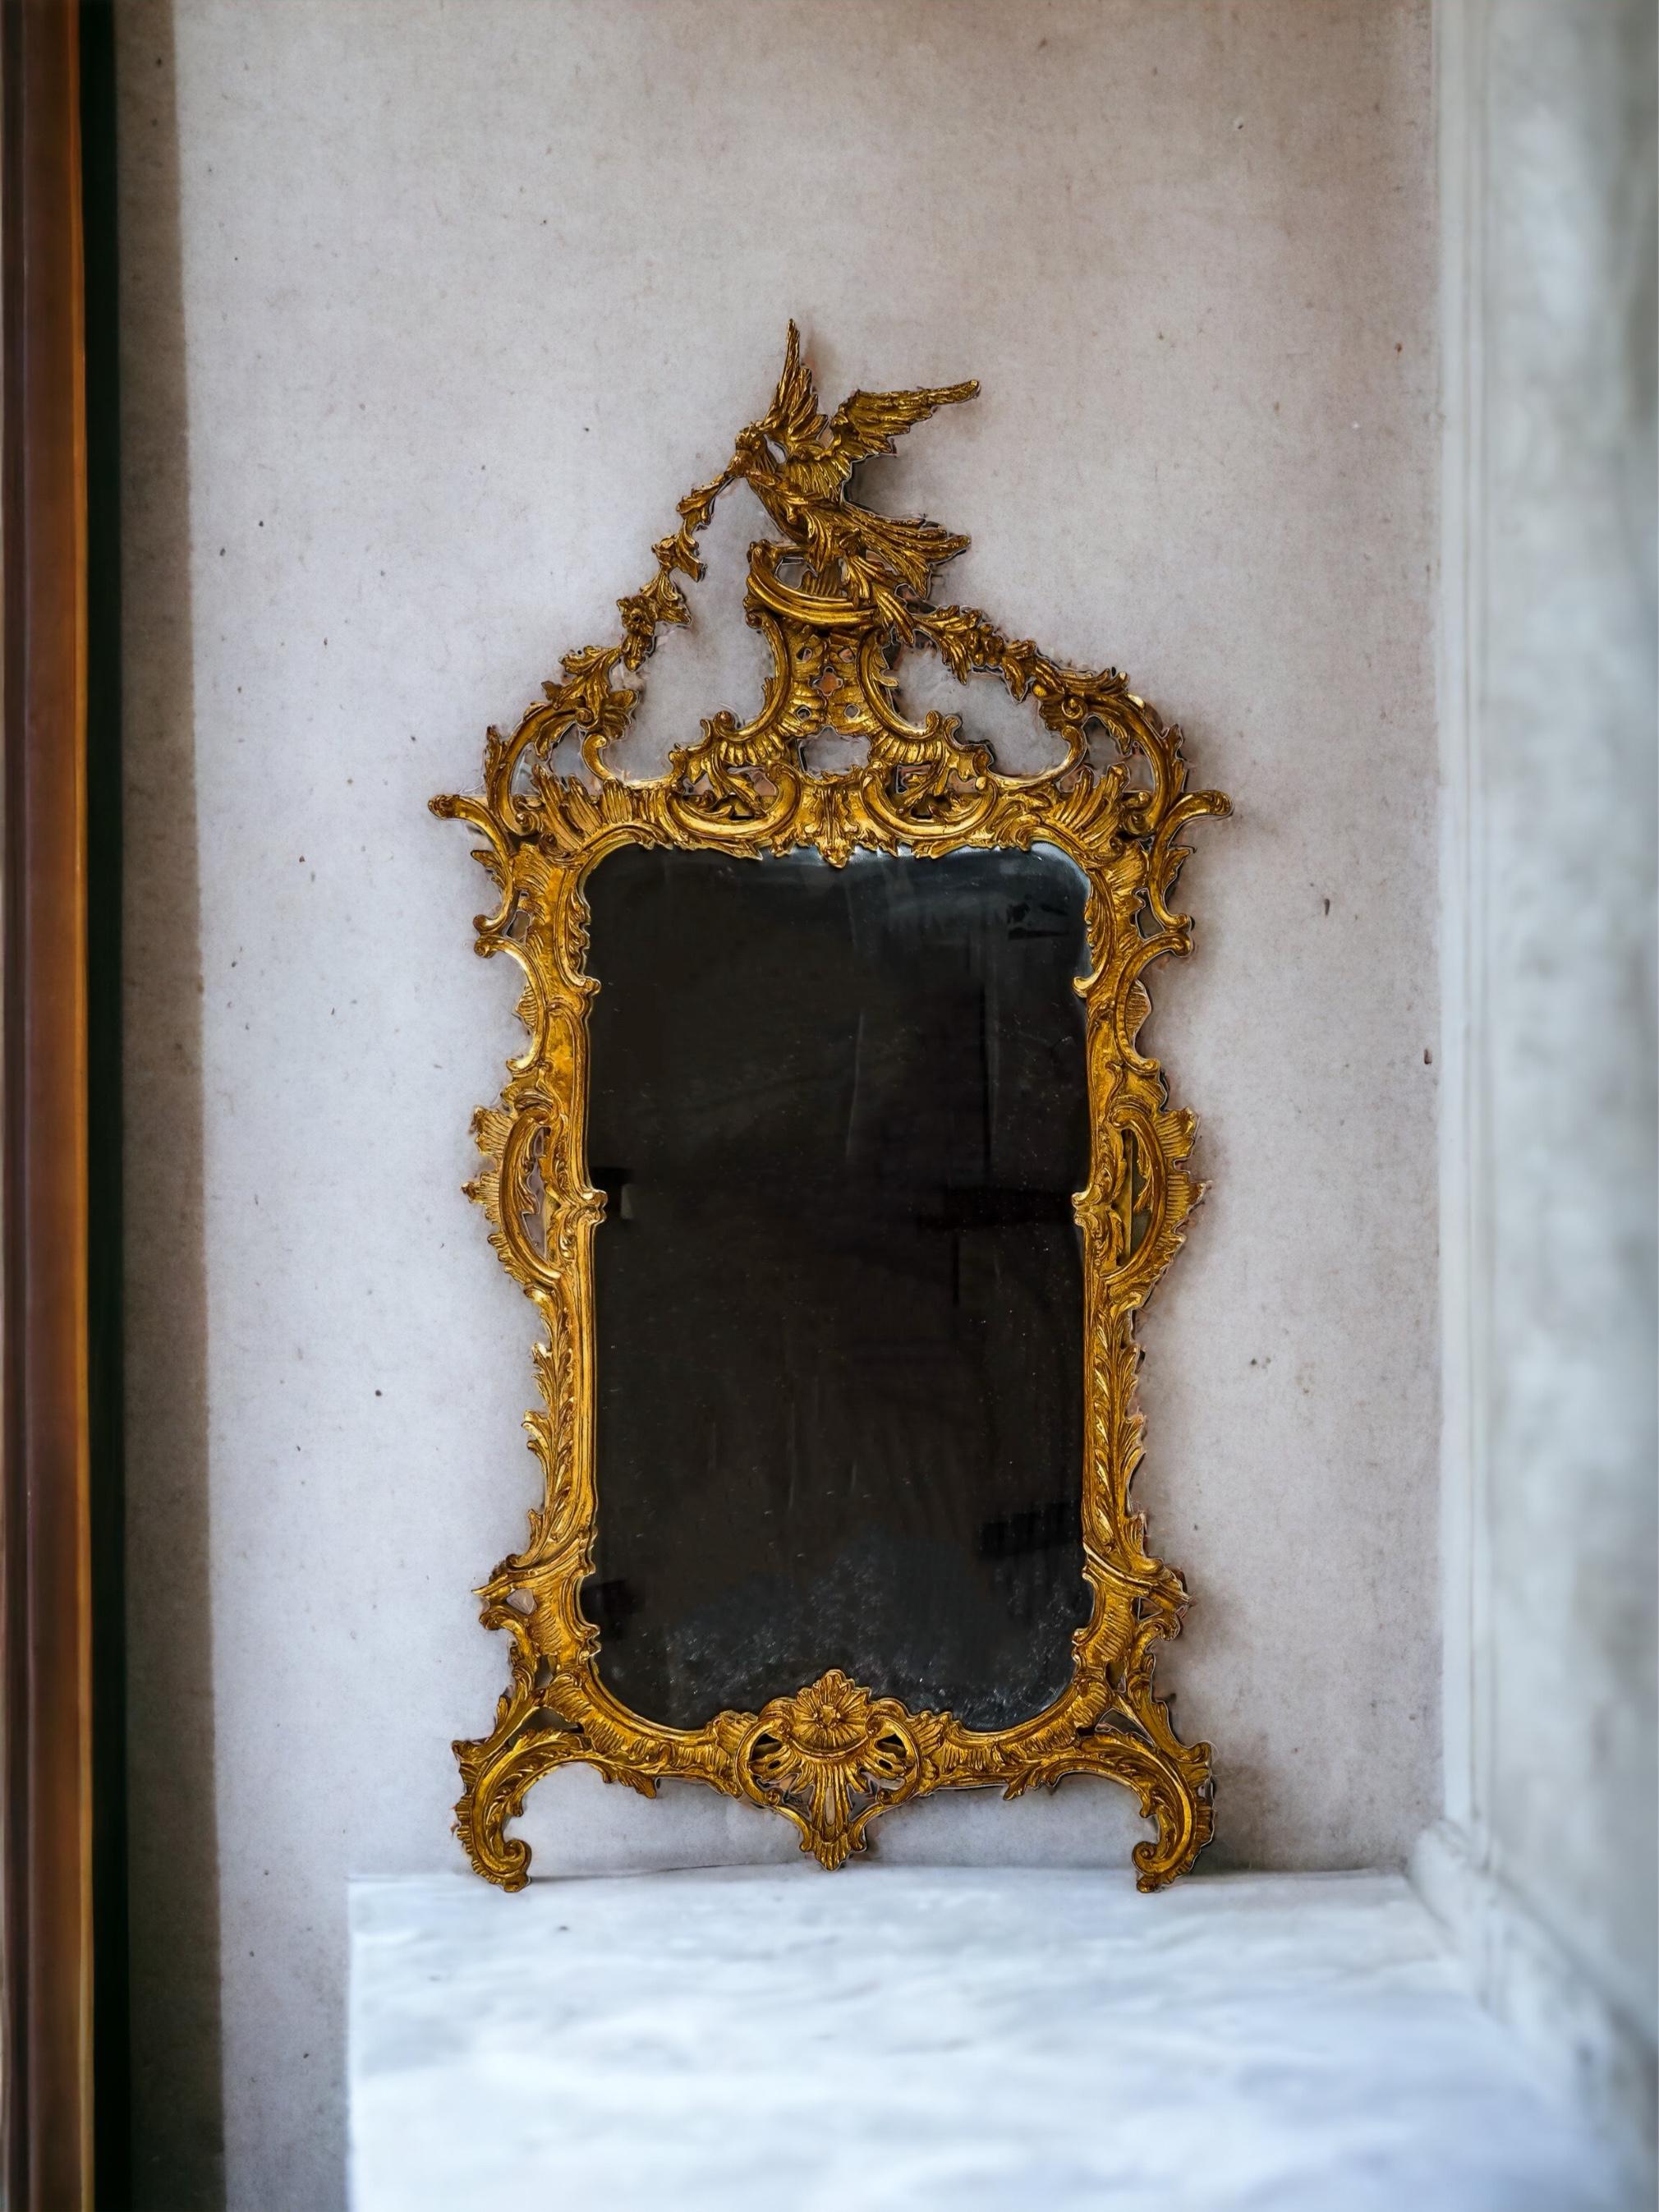 This is an Italian Chinese chippendale style carved giltwood mirror by Carver’s Gild. It is a really nice scale, and note the Ho Ho bird with the draping garland. It is marked and in very good condition.